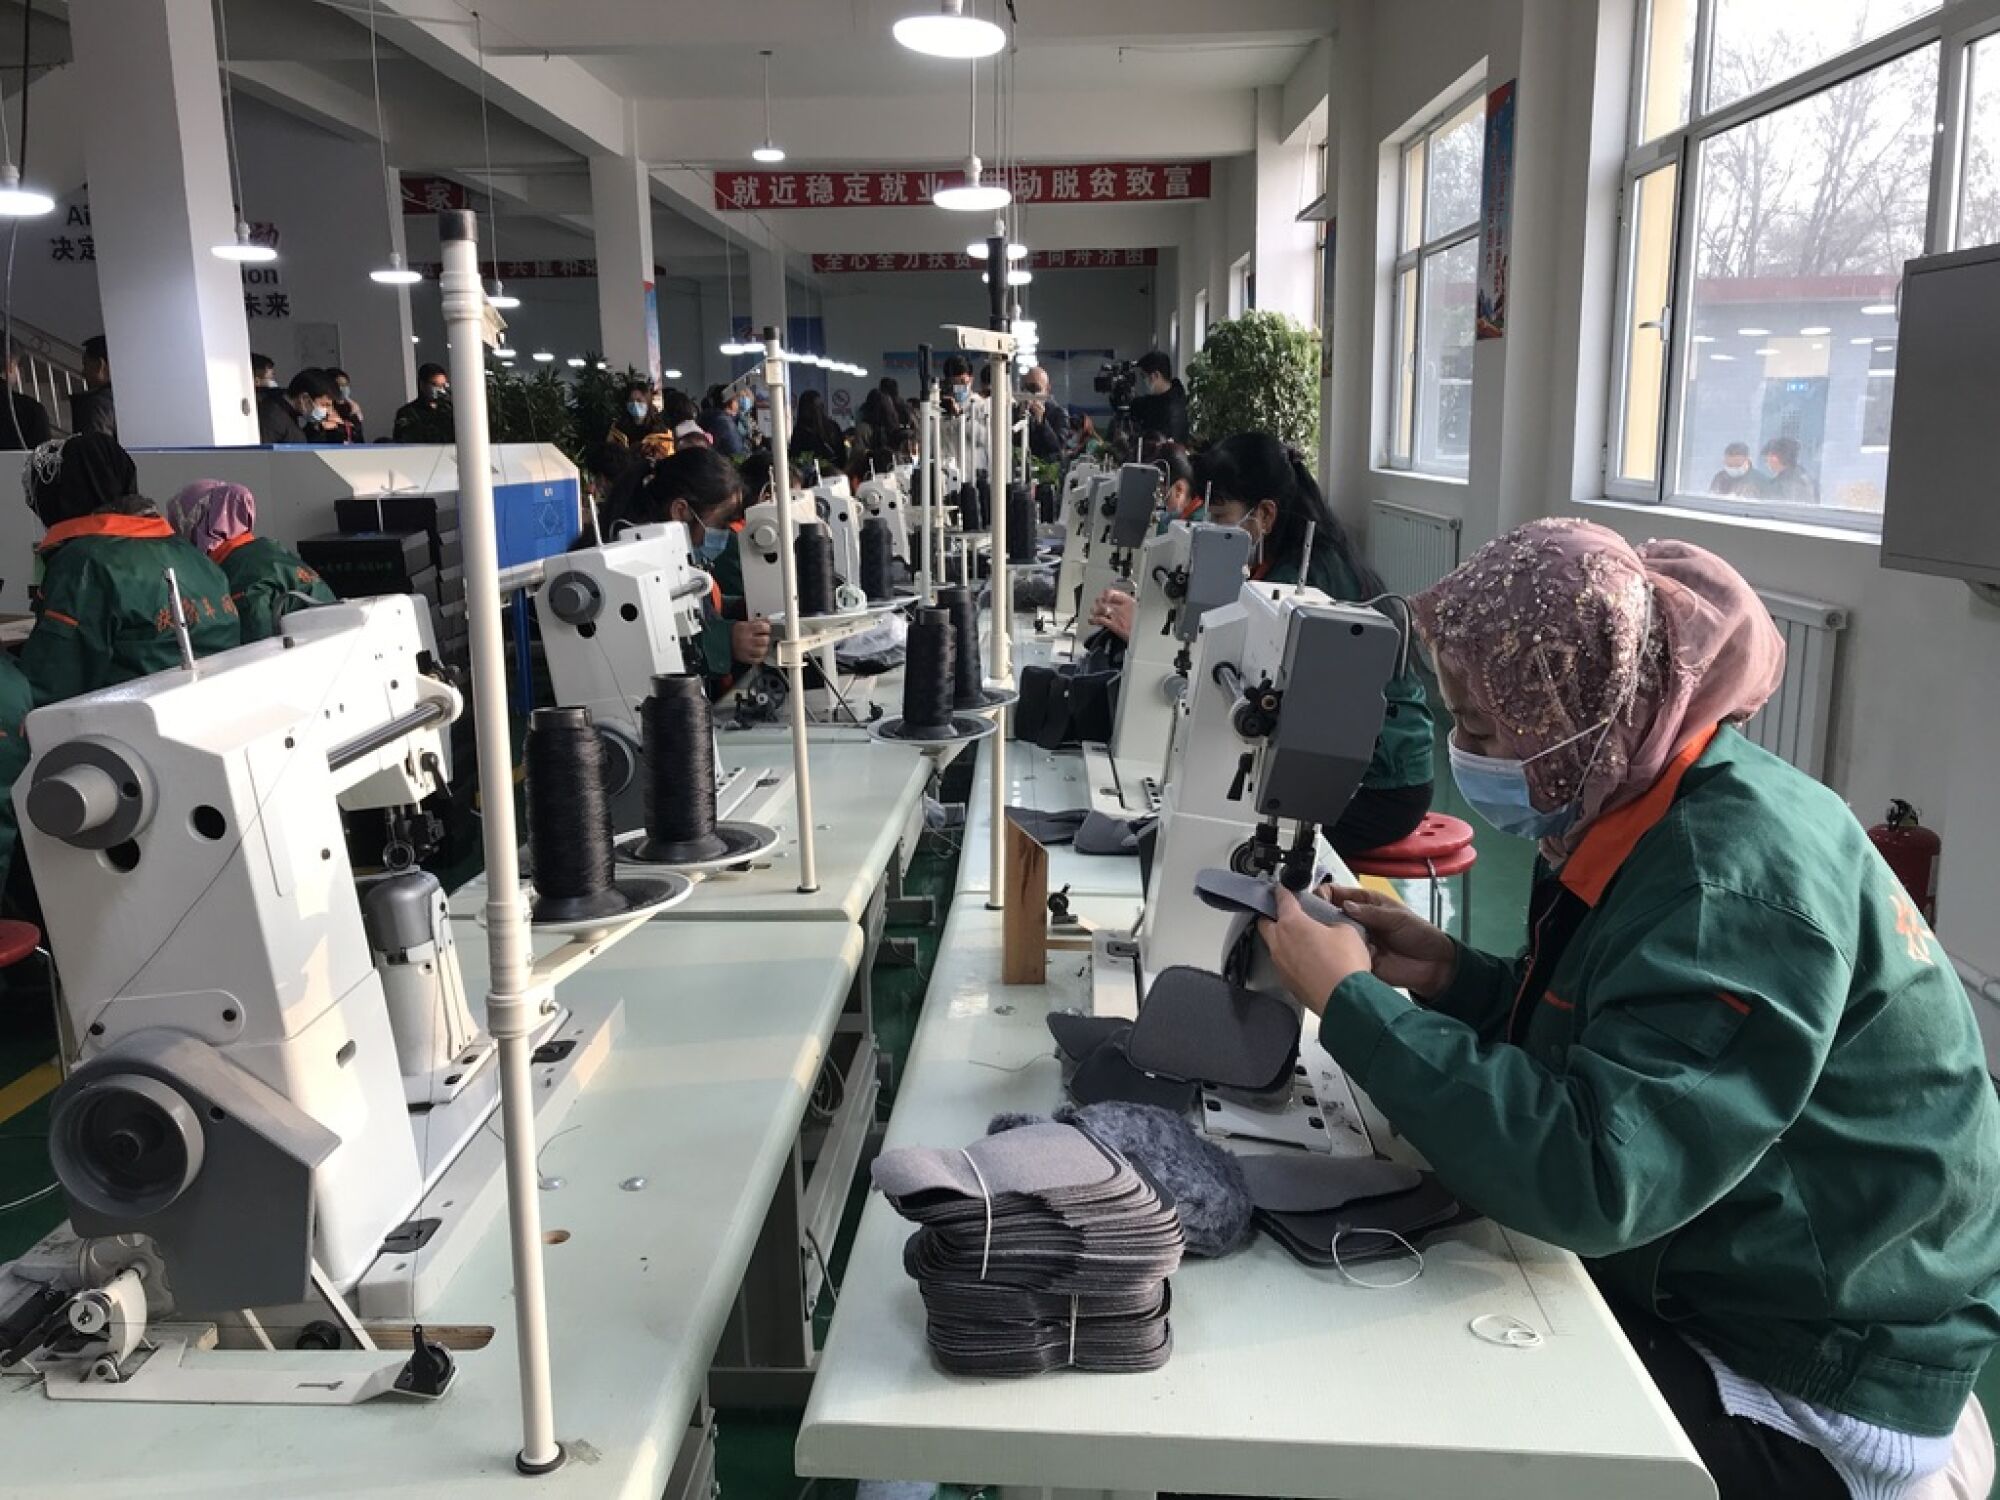 Hui minority women sew shoe interiors together at a "poverty alleviation factory" on the outskirts of Linxia.